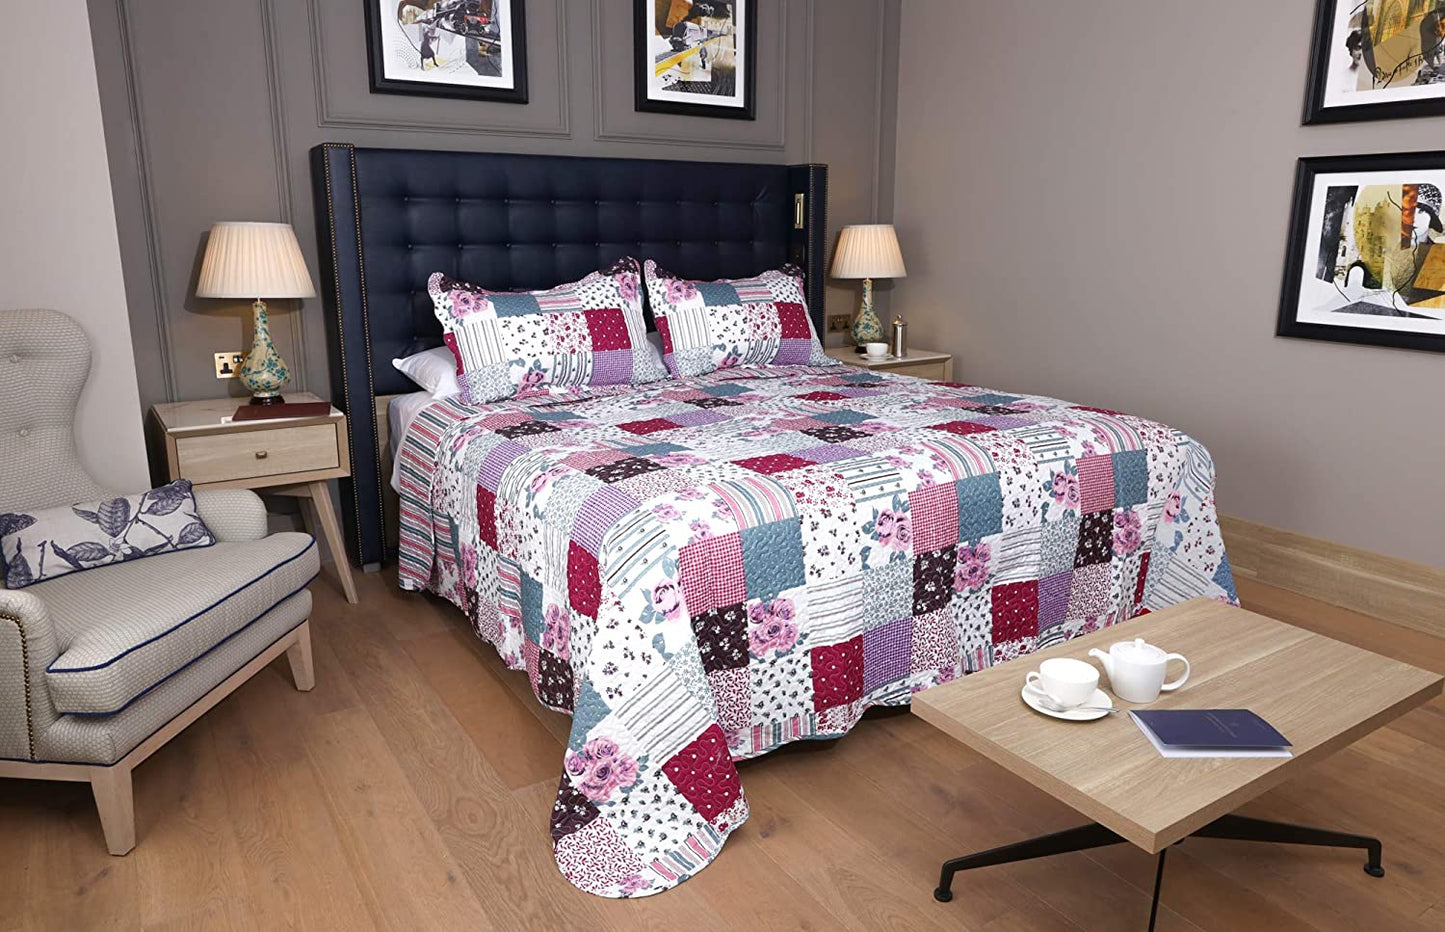 Single Bed Quilted Bedspread And Pillowsham Throw Over Freya Purple 180cm x 240cm